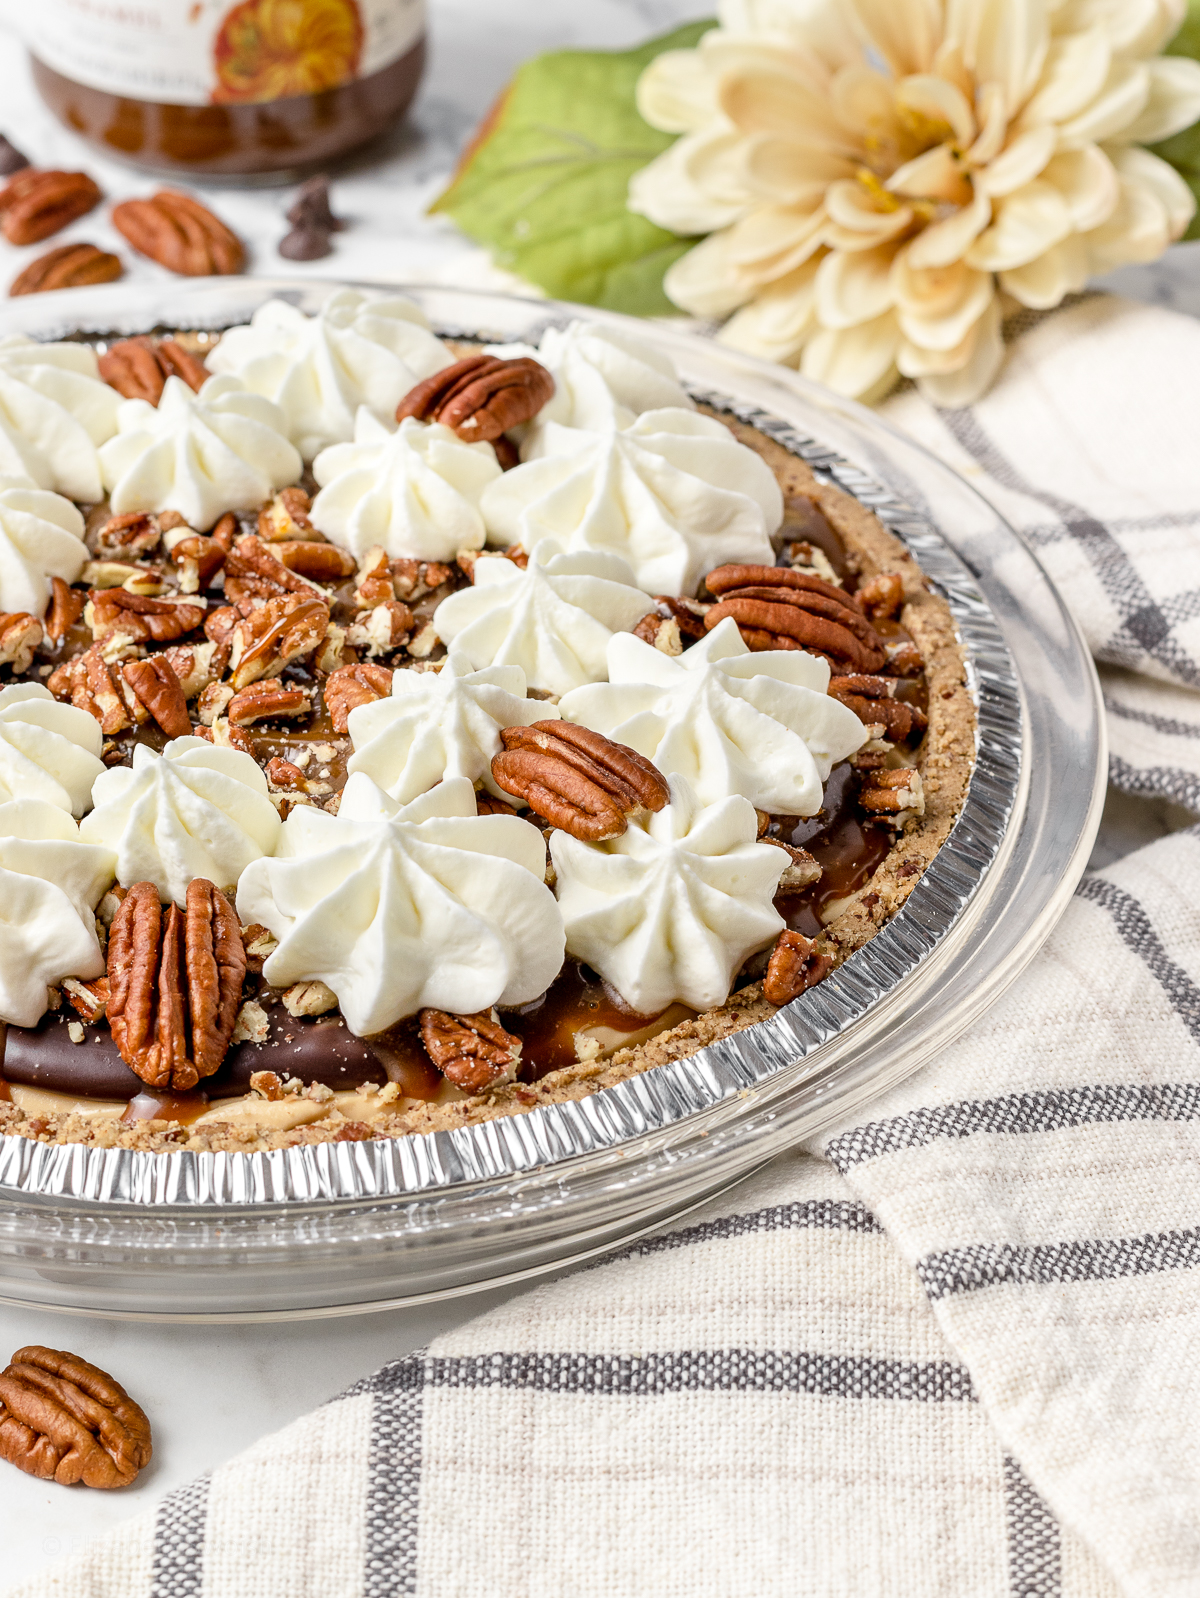 Close up of whole turtle pie to see toppings of chocolate ganache, caramel drizzle, whipped cream, chopped pecans, and pecan halves.